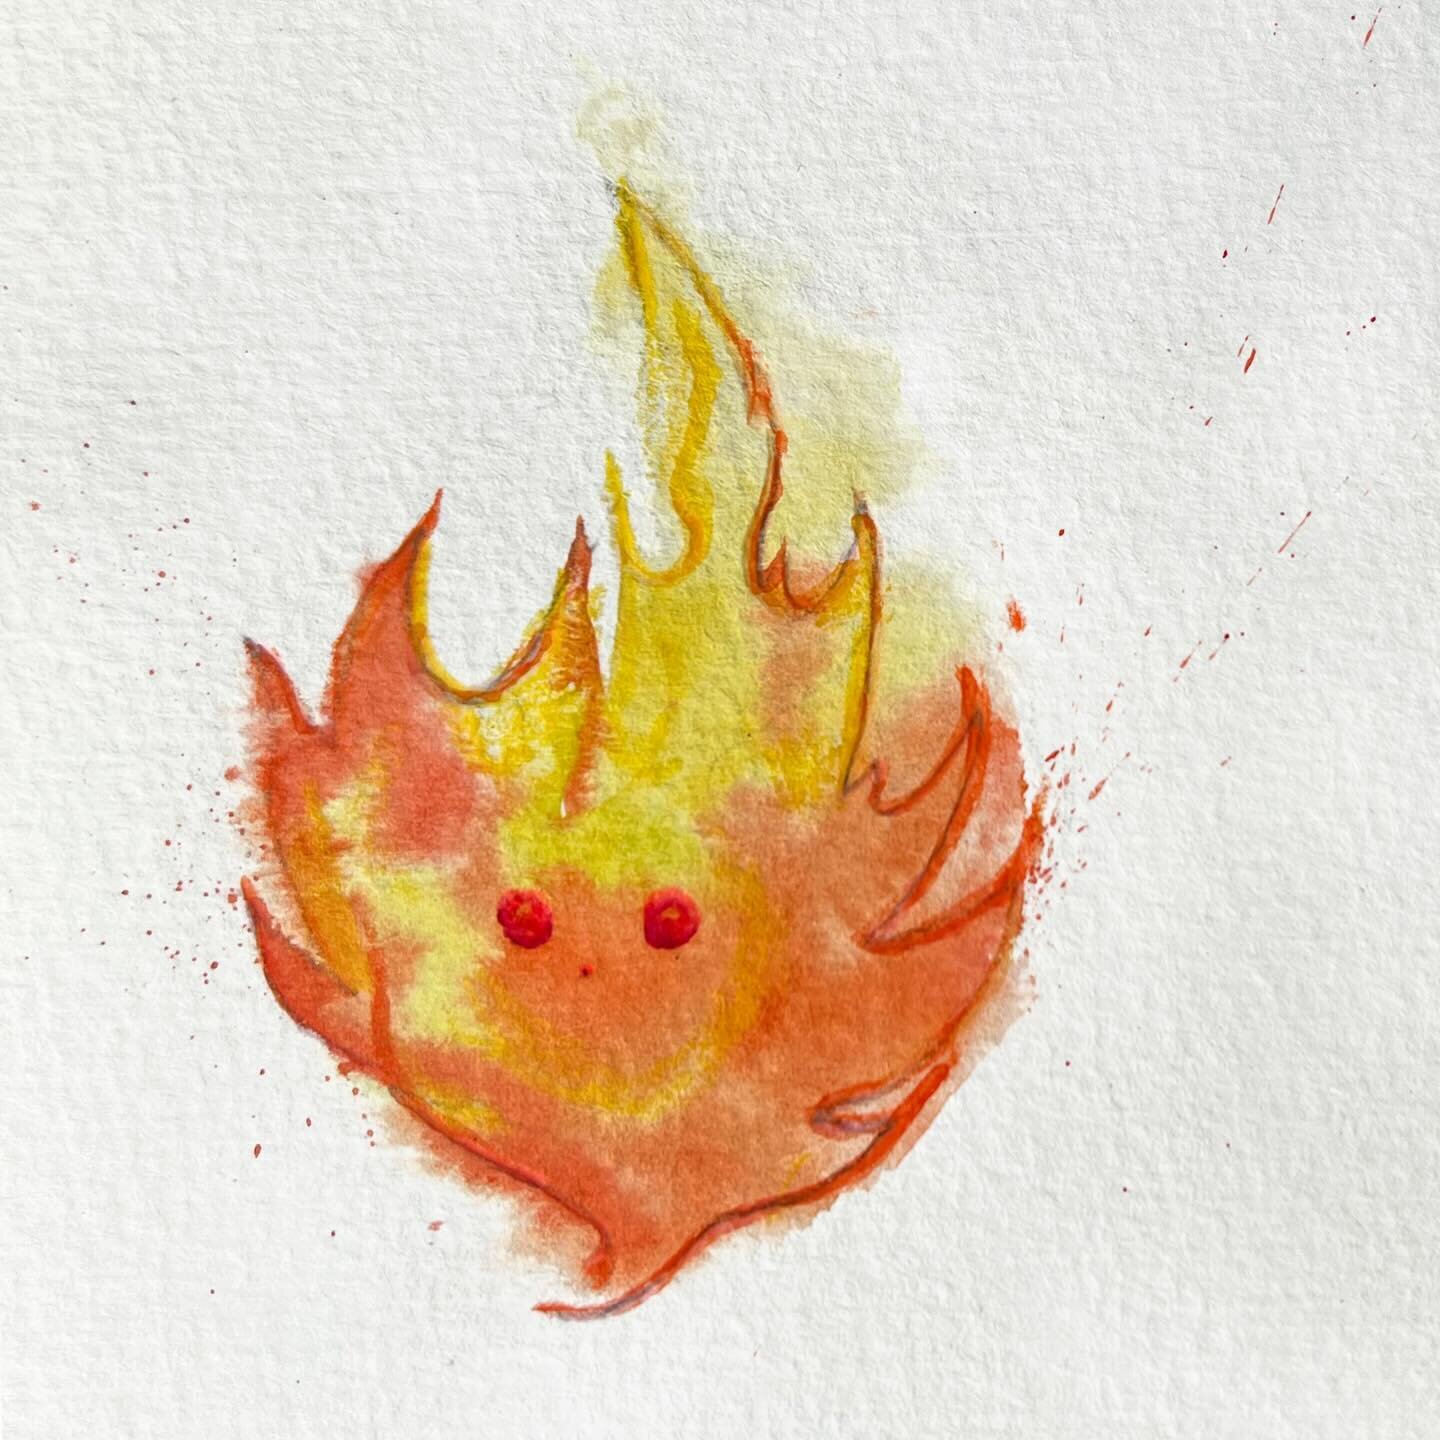 drew the cutest little fire real quick😯